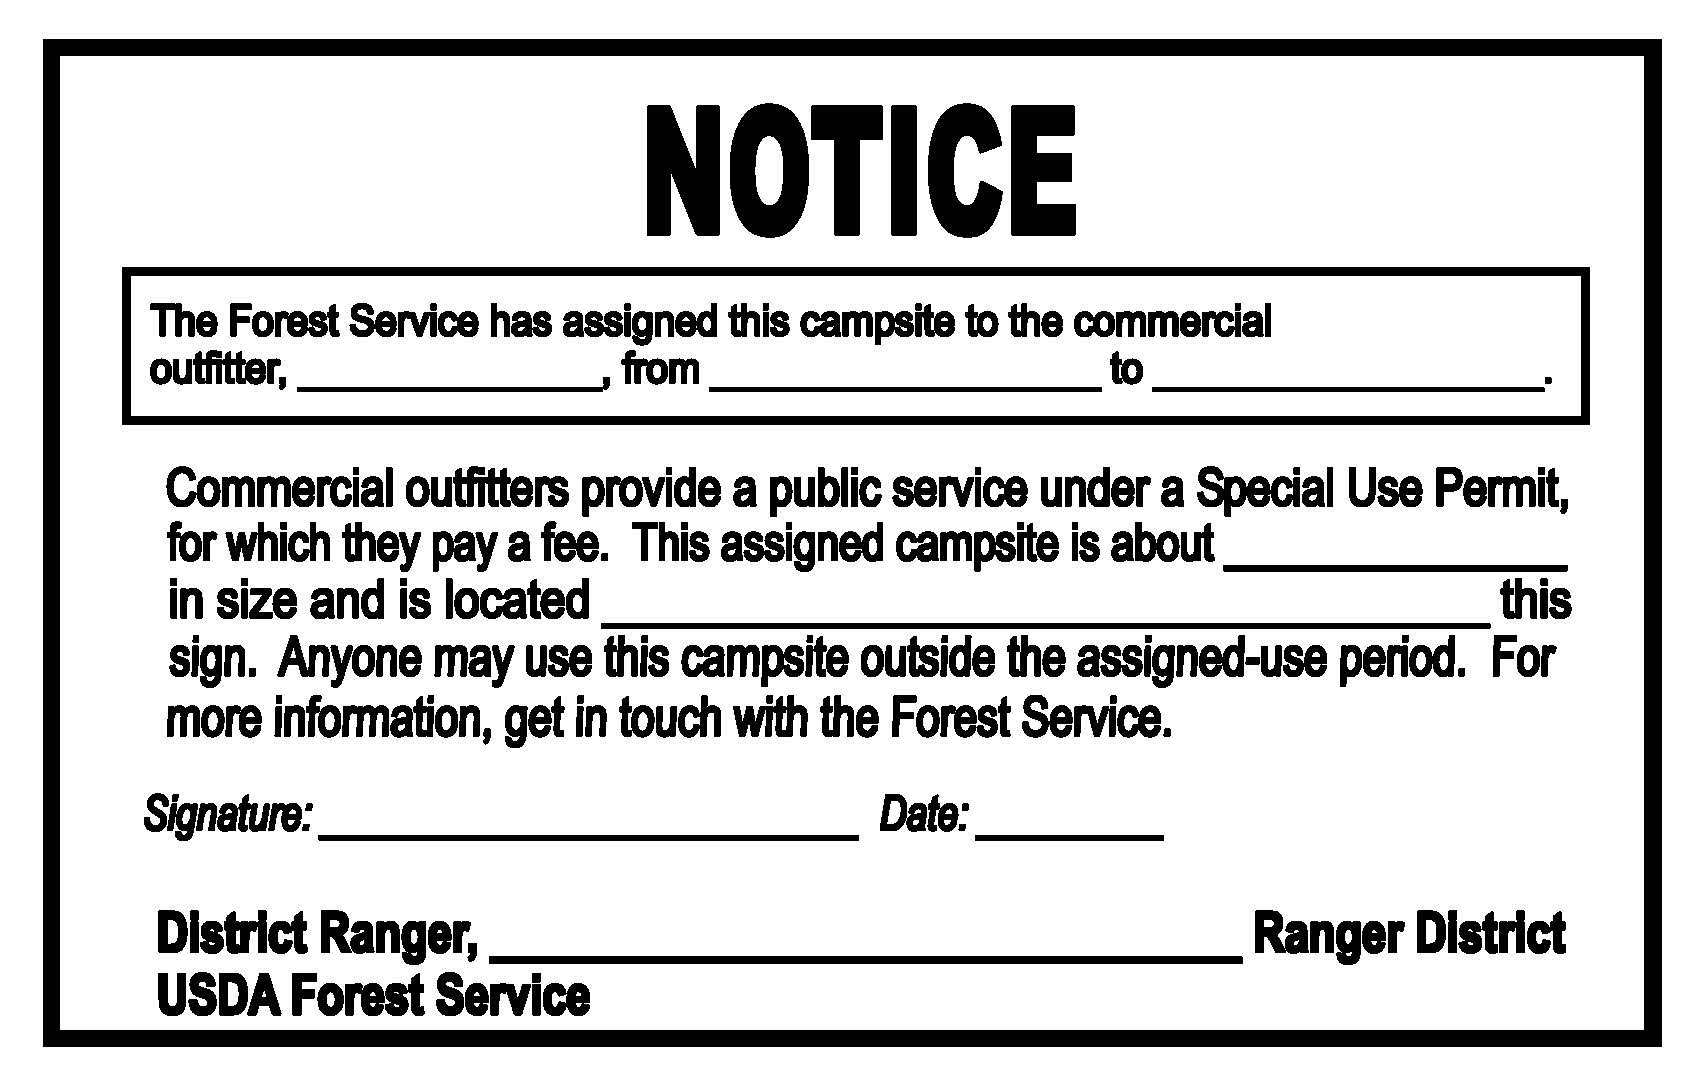 USFS provides outfitters with signage that describes the dates of outfitter exclusive use and is posted at the sites registered for outfitter basecamps and spike camps. 